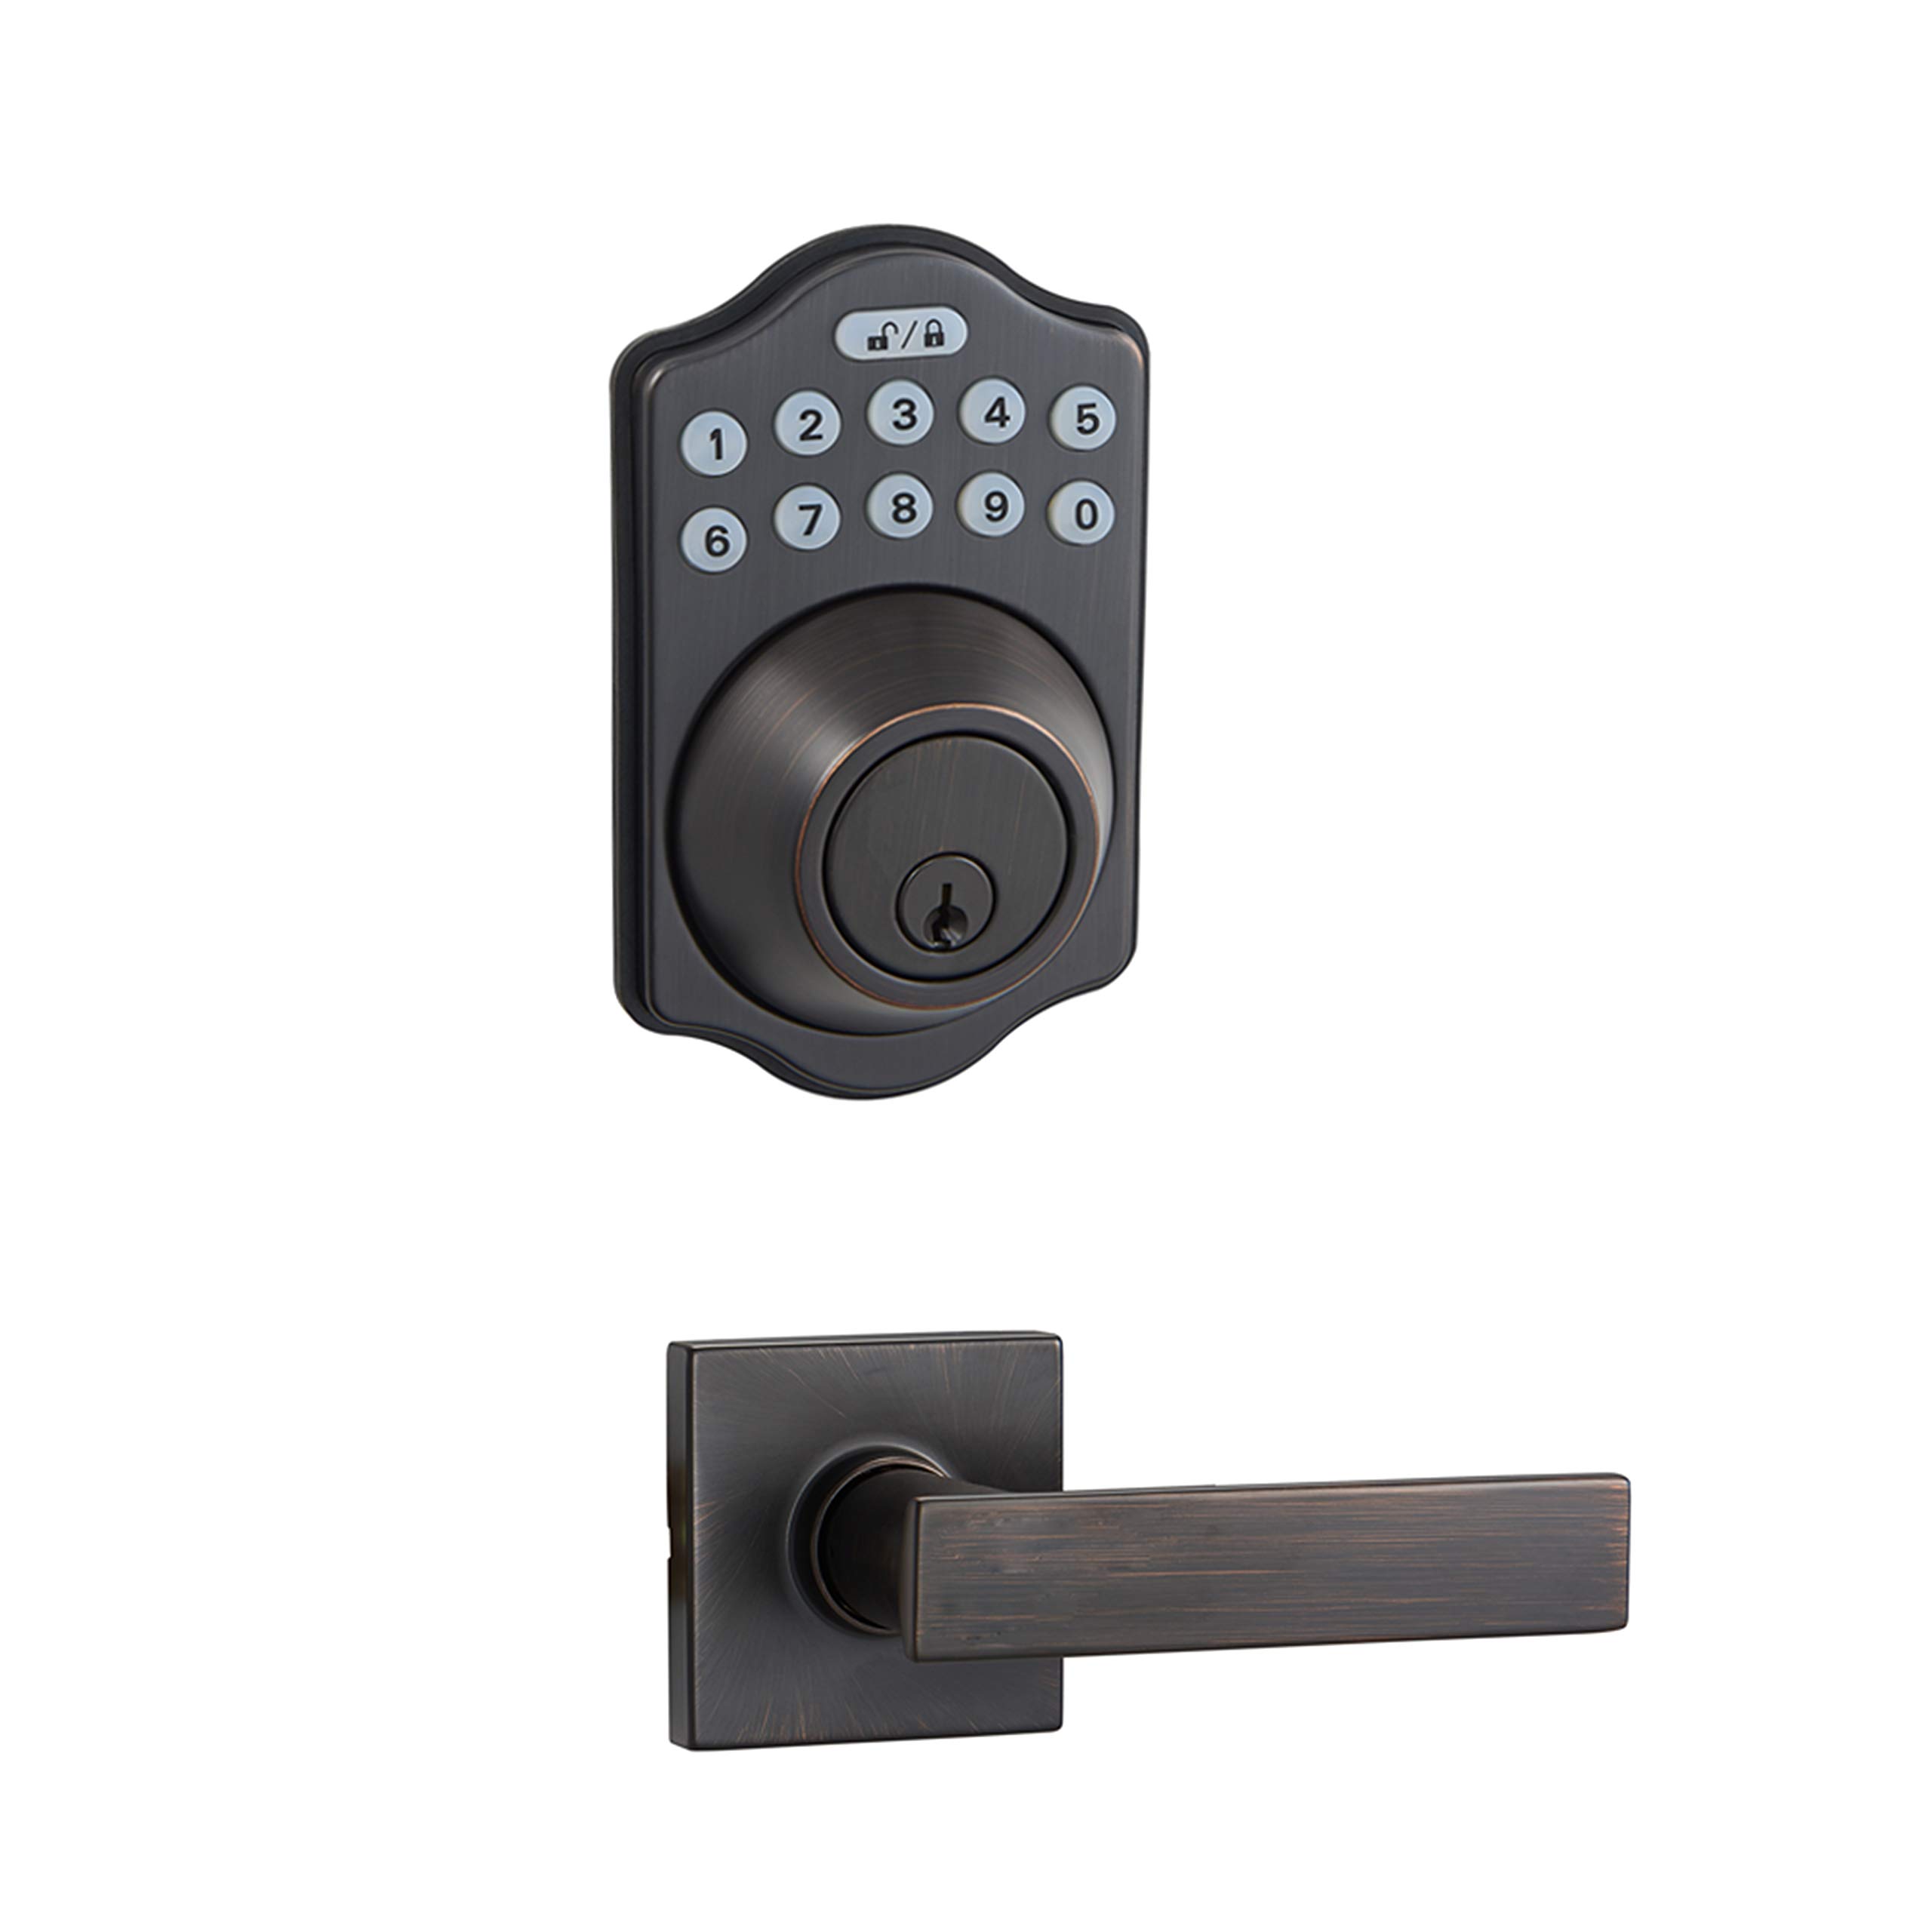 Amazon Basics Traditional Electronic Keypad Deadbolt Door Lock with Passage Lever - Oil Rubbed Bronze